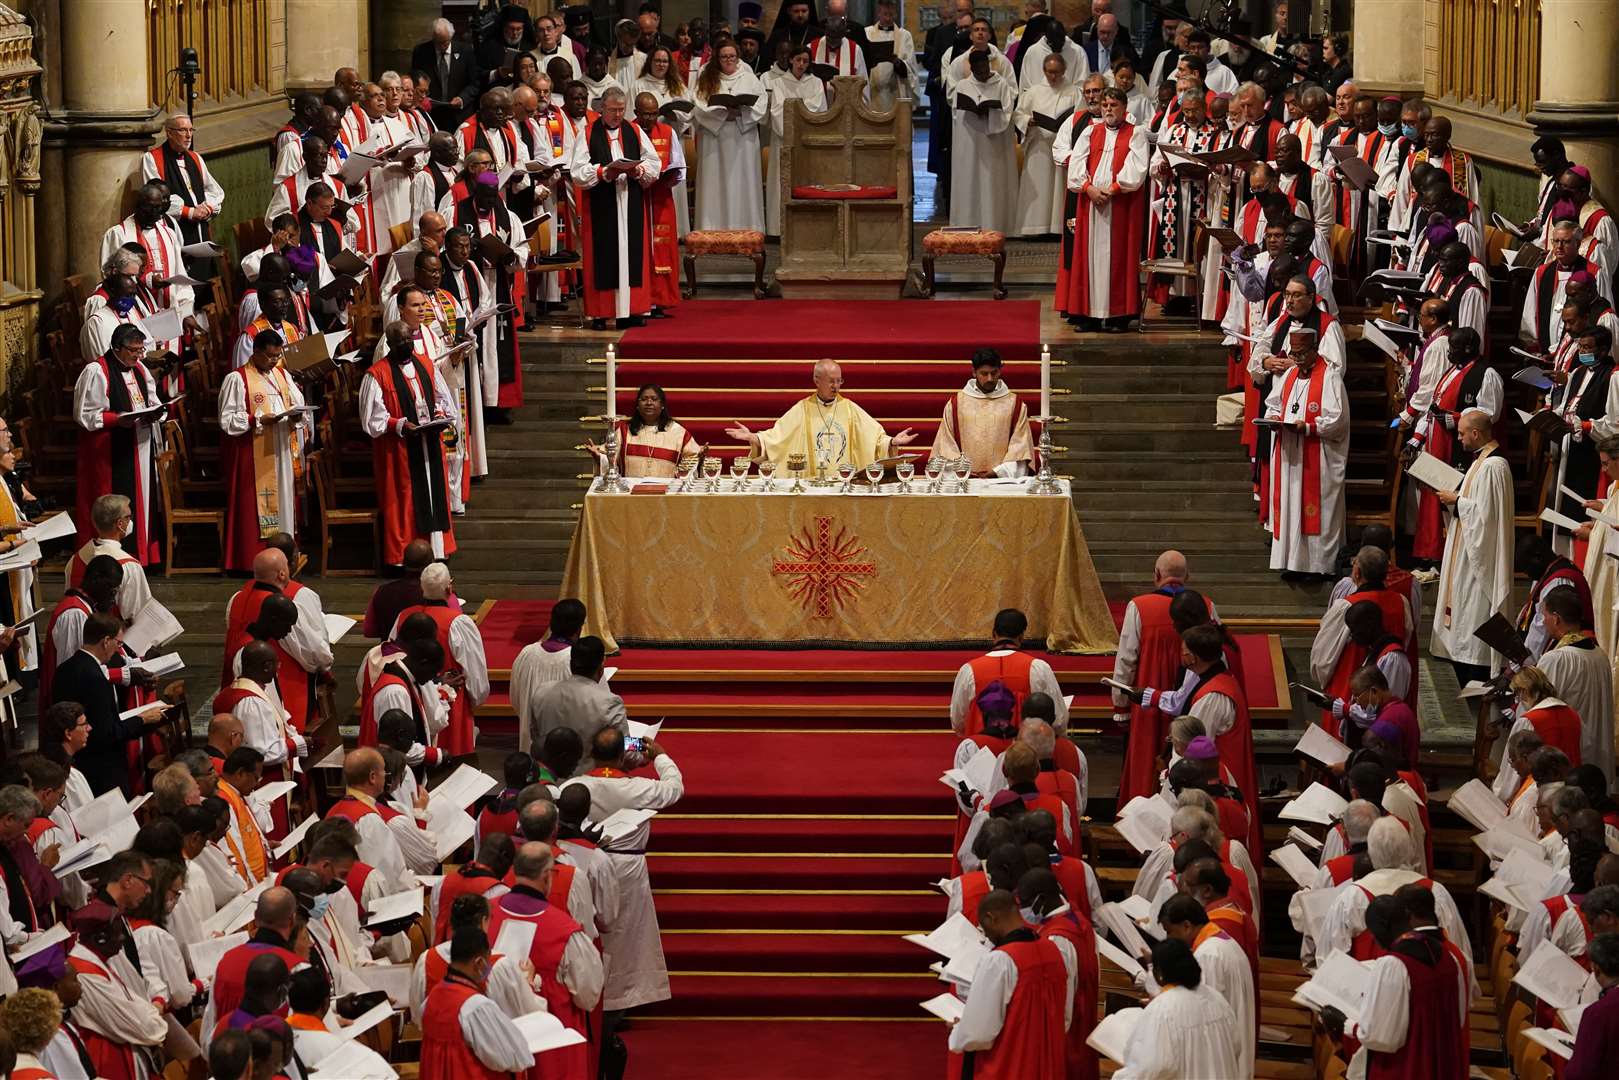 Archbishop of Canterbury Justin Welby at the altar during the opening service of the Lambeth Conference (Gareth Fuller/PA)